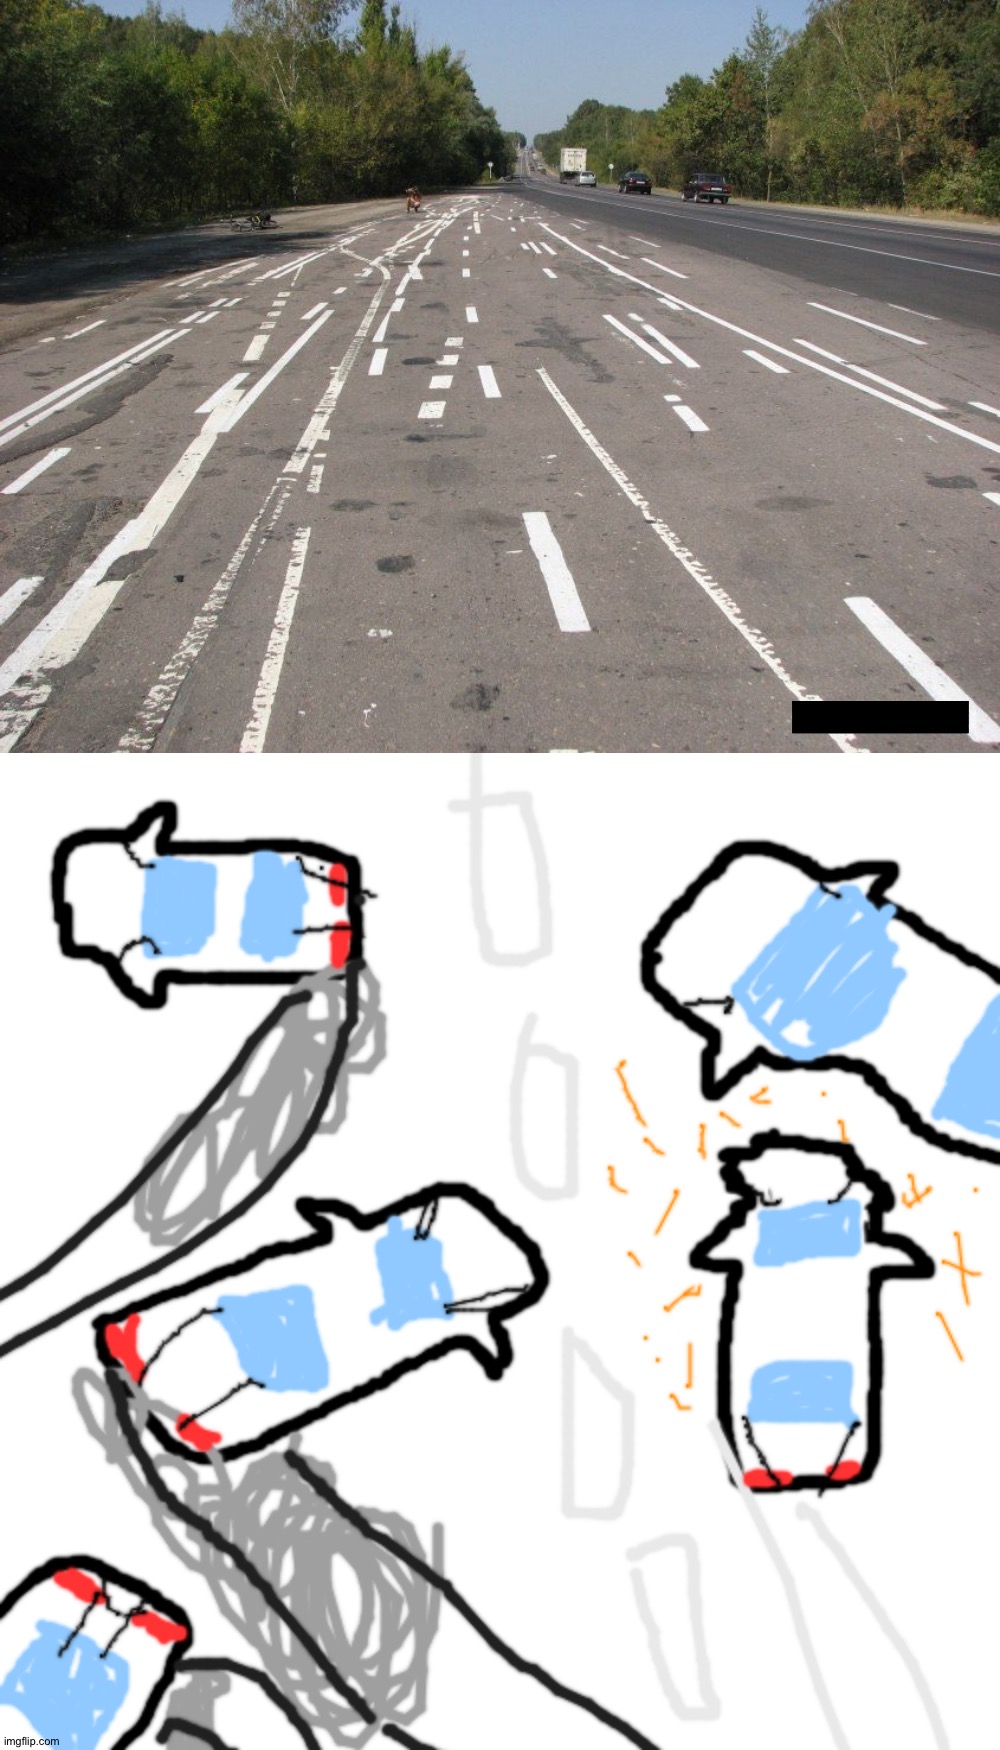 This road... | image tagged in memes,blank transparent square,funny,funny memes,you had one job,drawings | made w/ Imgflip meme maker